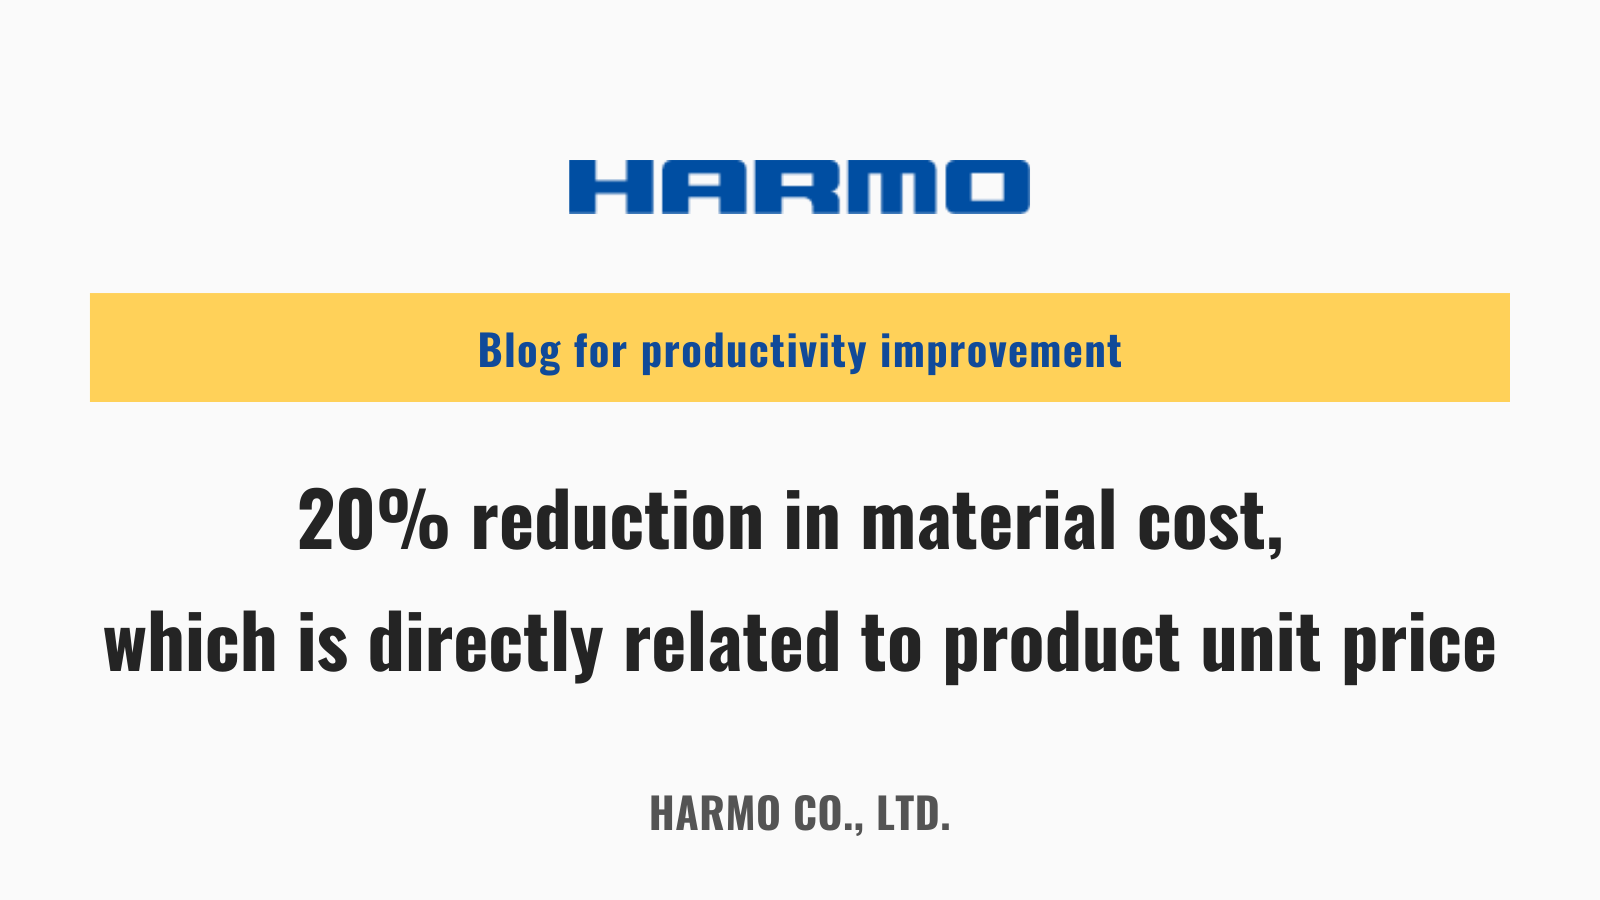 20% reduction in material cost, which is directly related to product to unit price